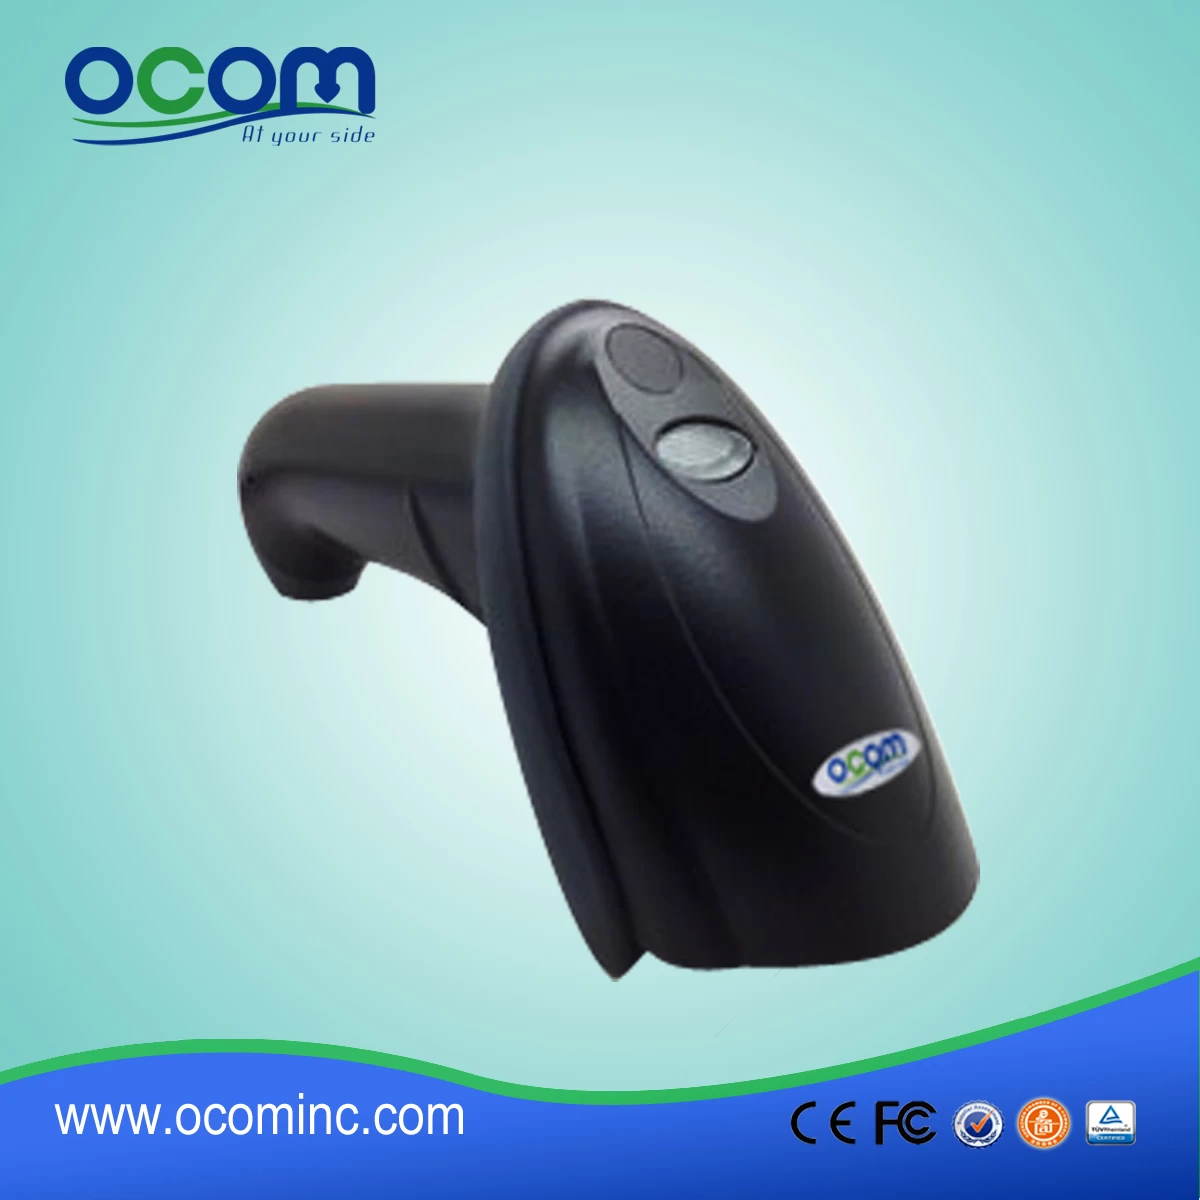 Chinese Low cost handheld 1/2d barcode reader